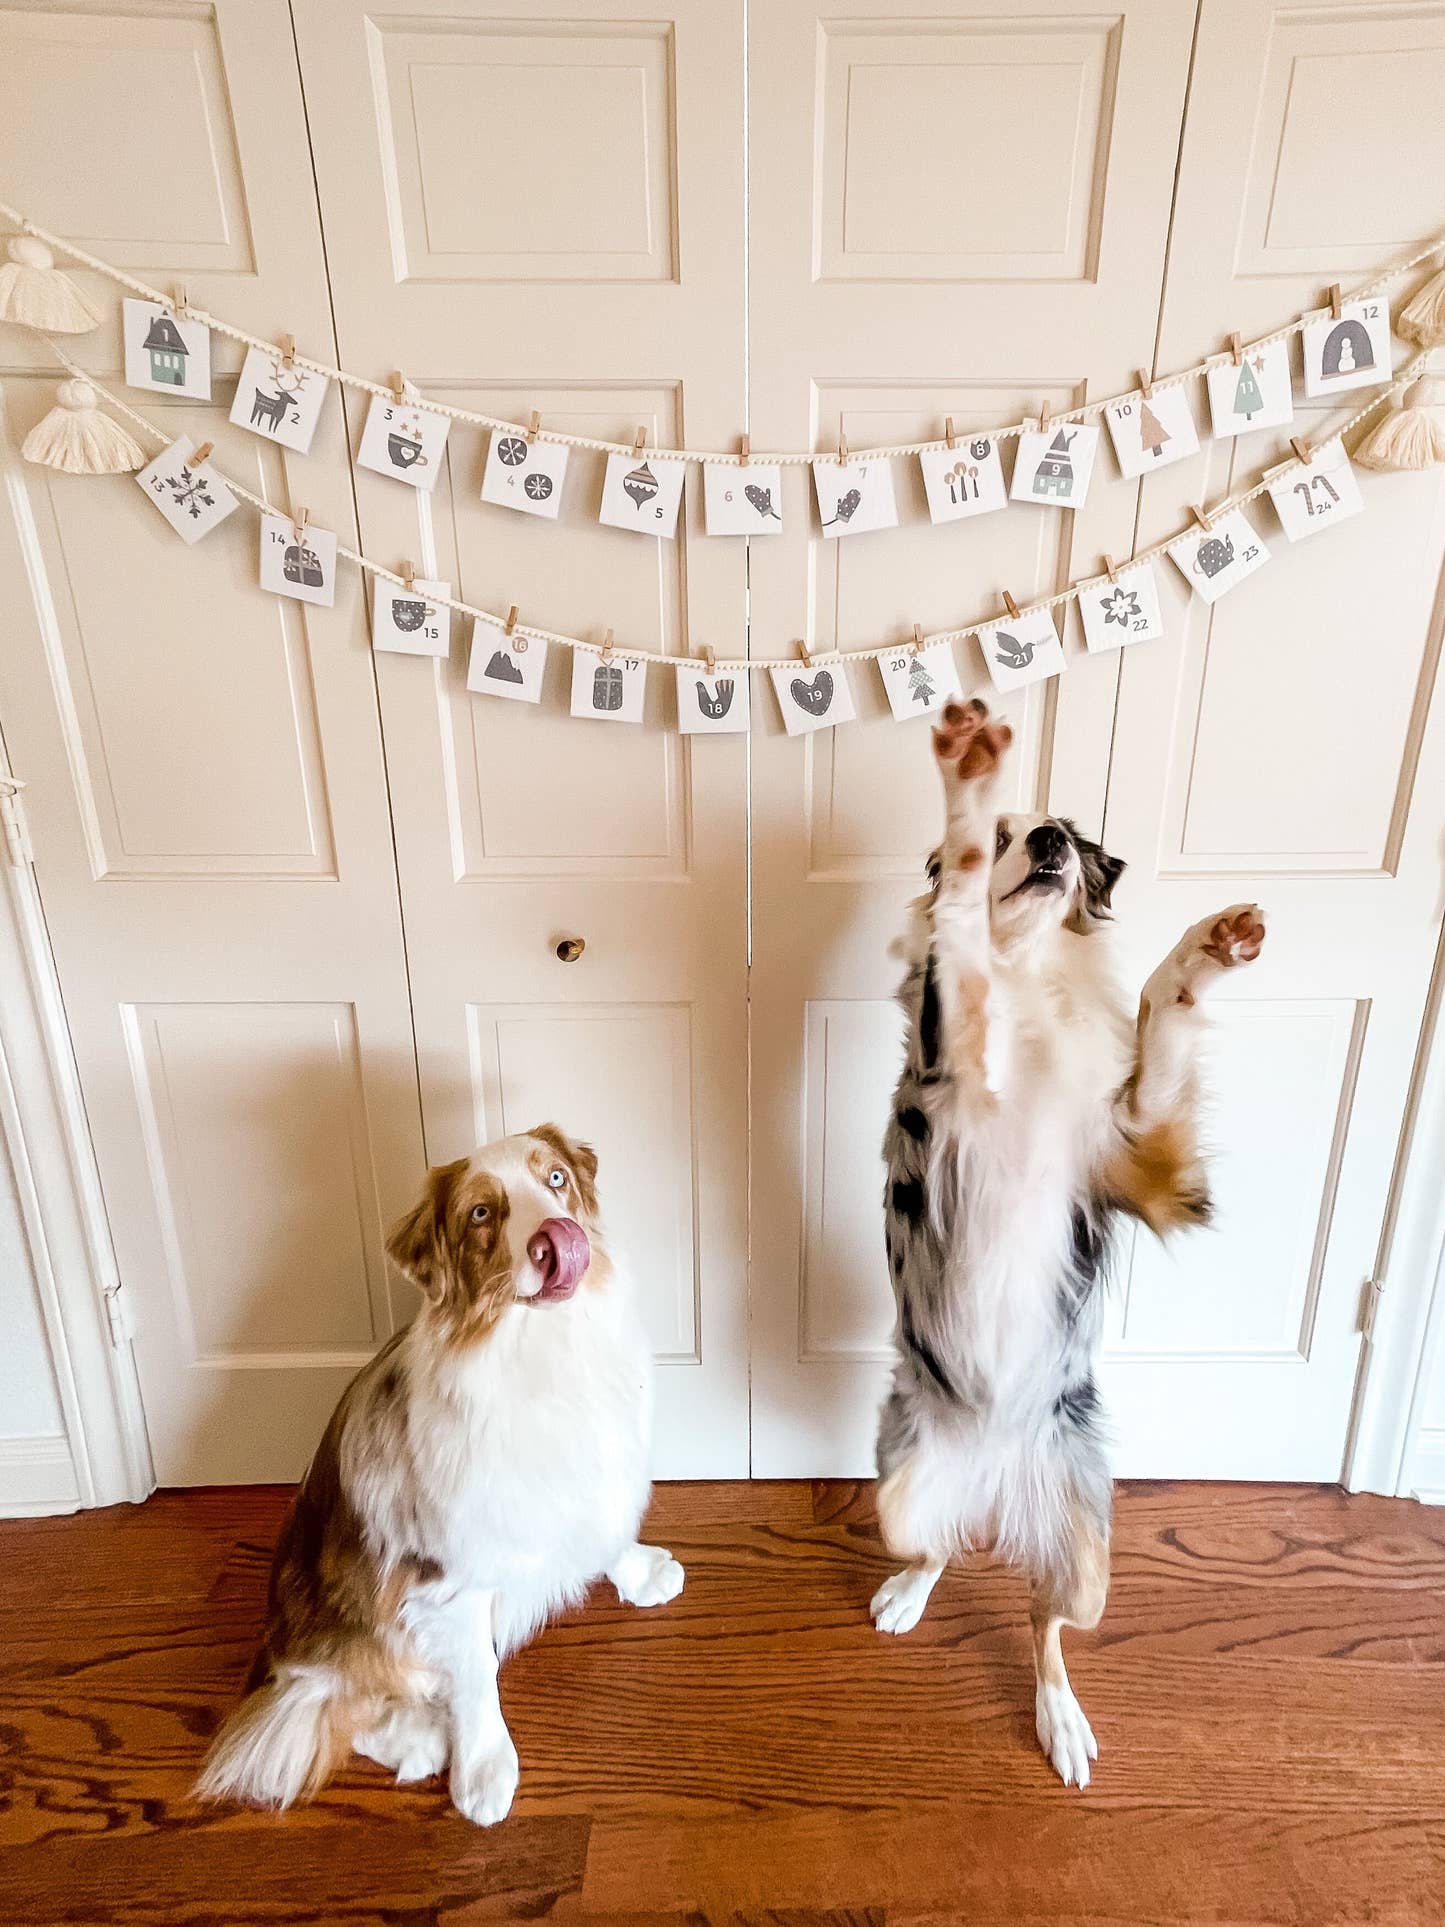 DIY 24-Day Tea Advent Calendar with two dogs